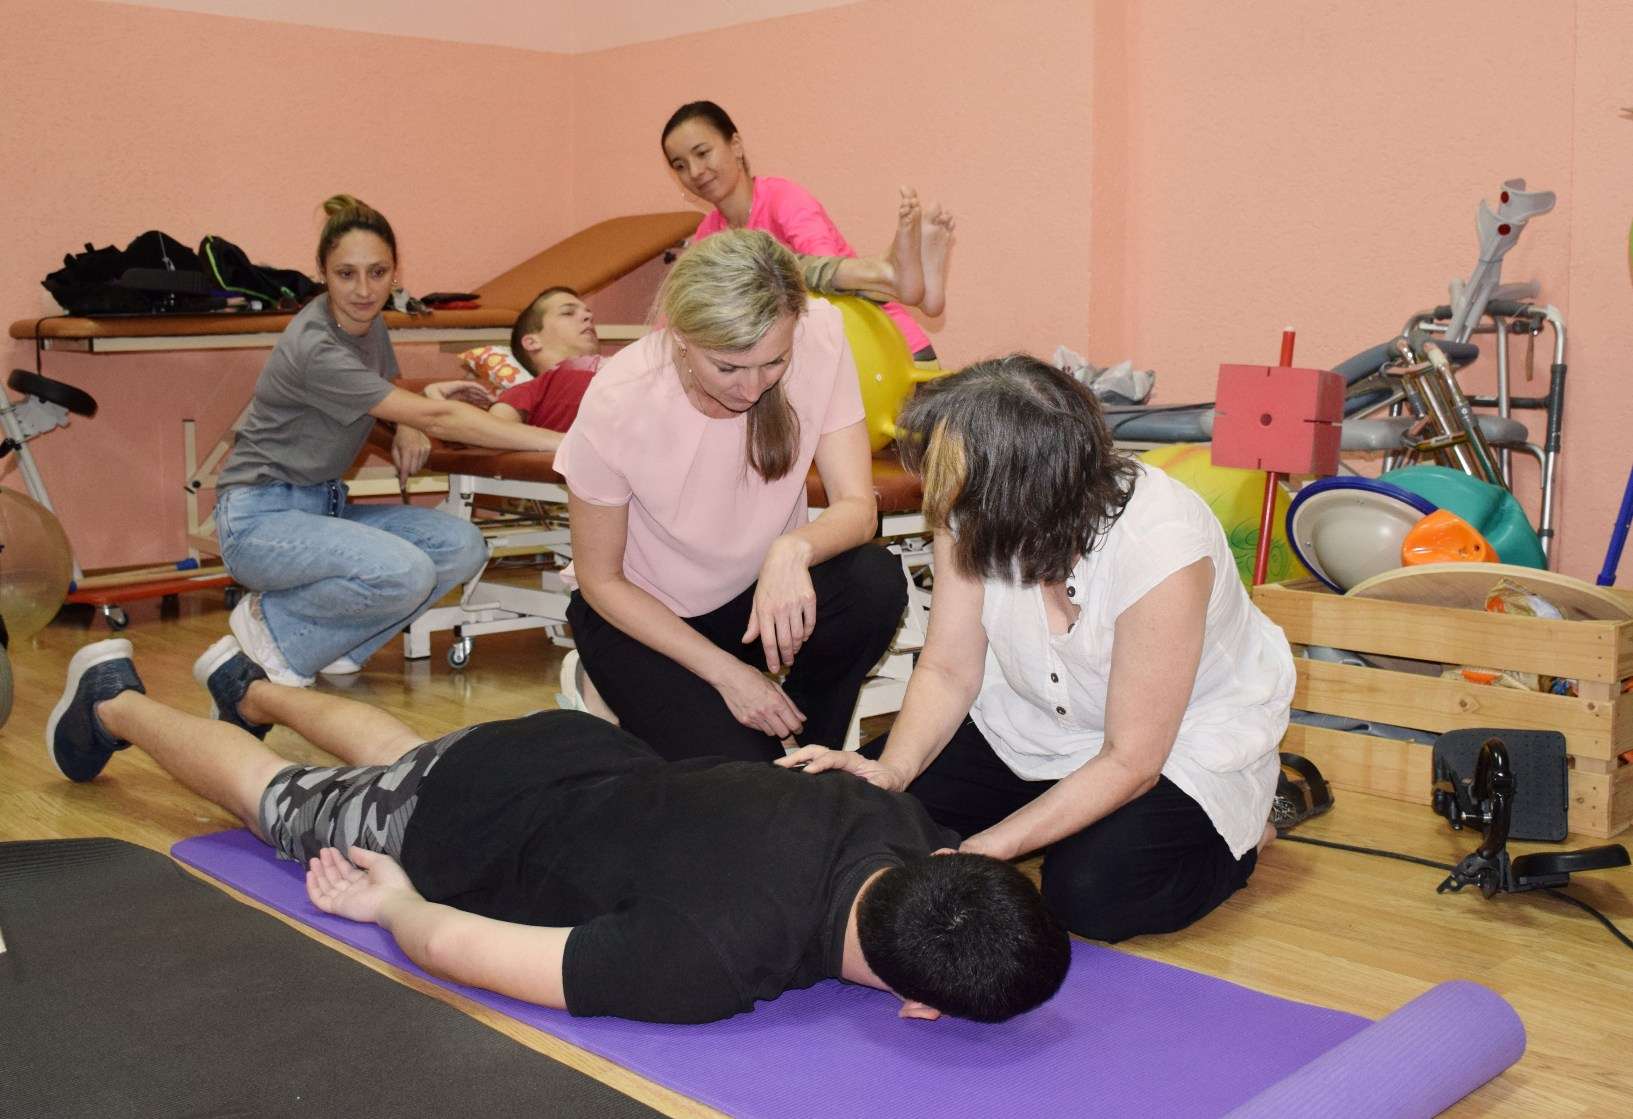 These days a physiotherapist from Switzerland worked in Zakarpattia